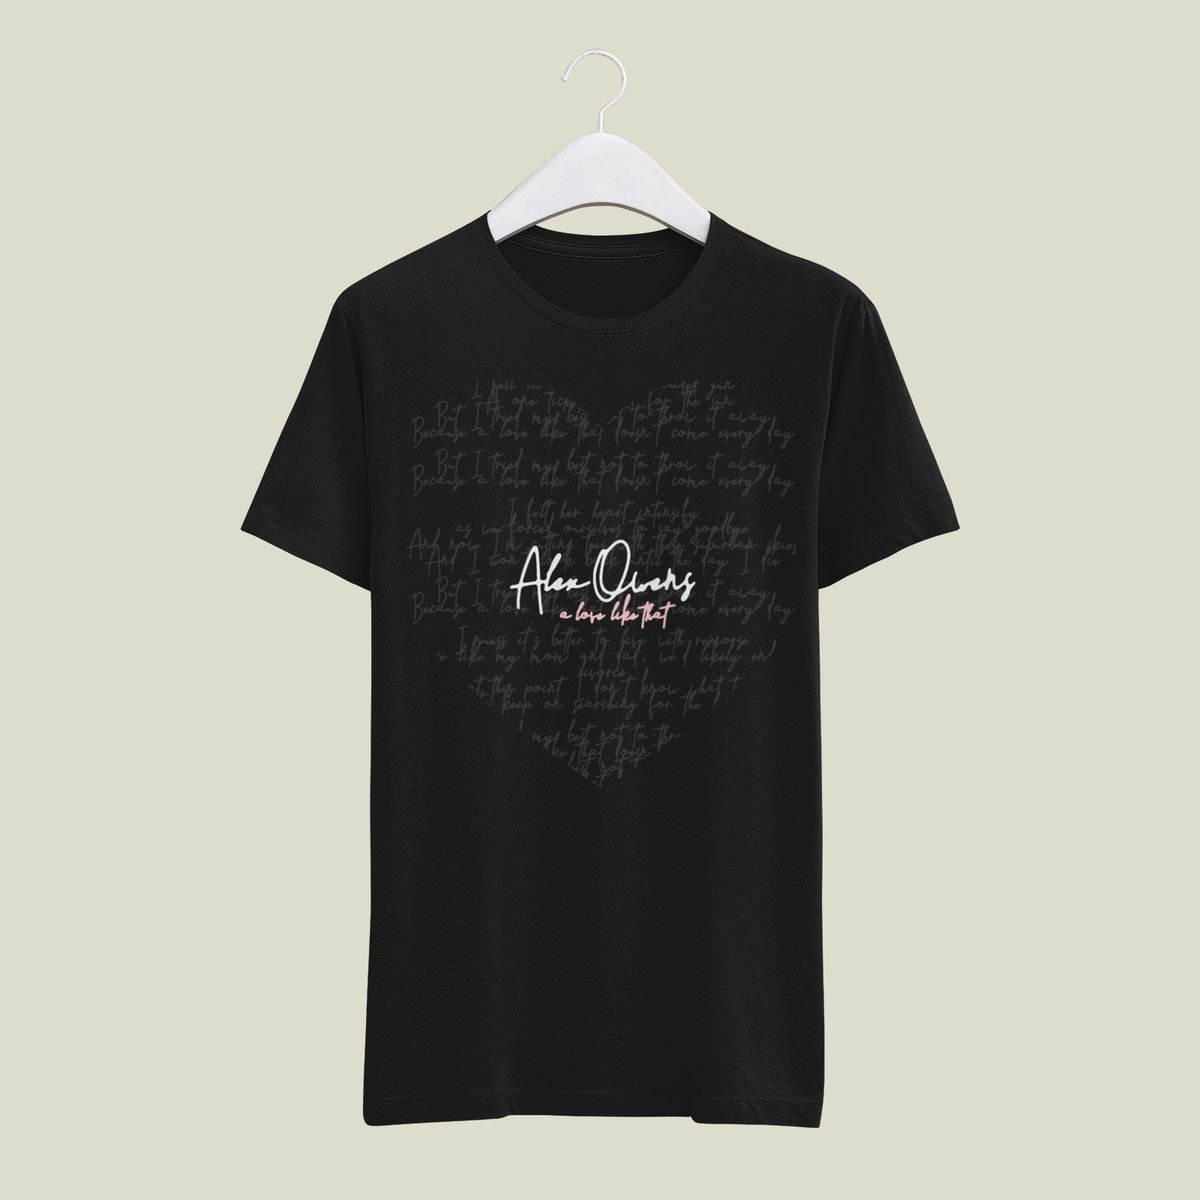 Image of "A Love Like That" Tee